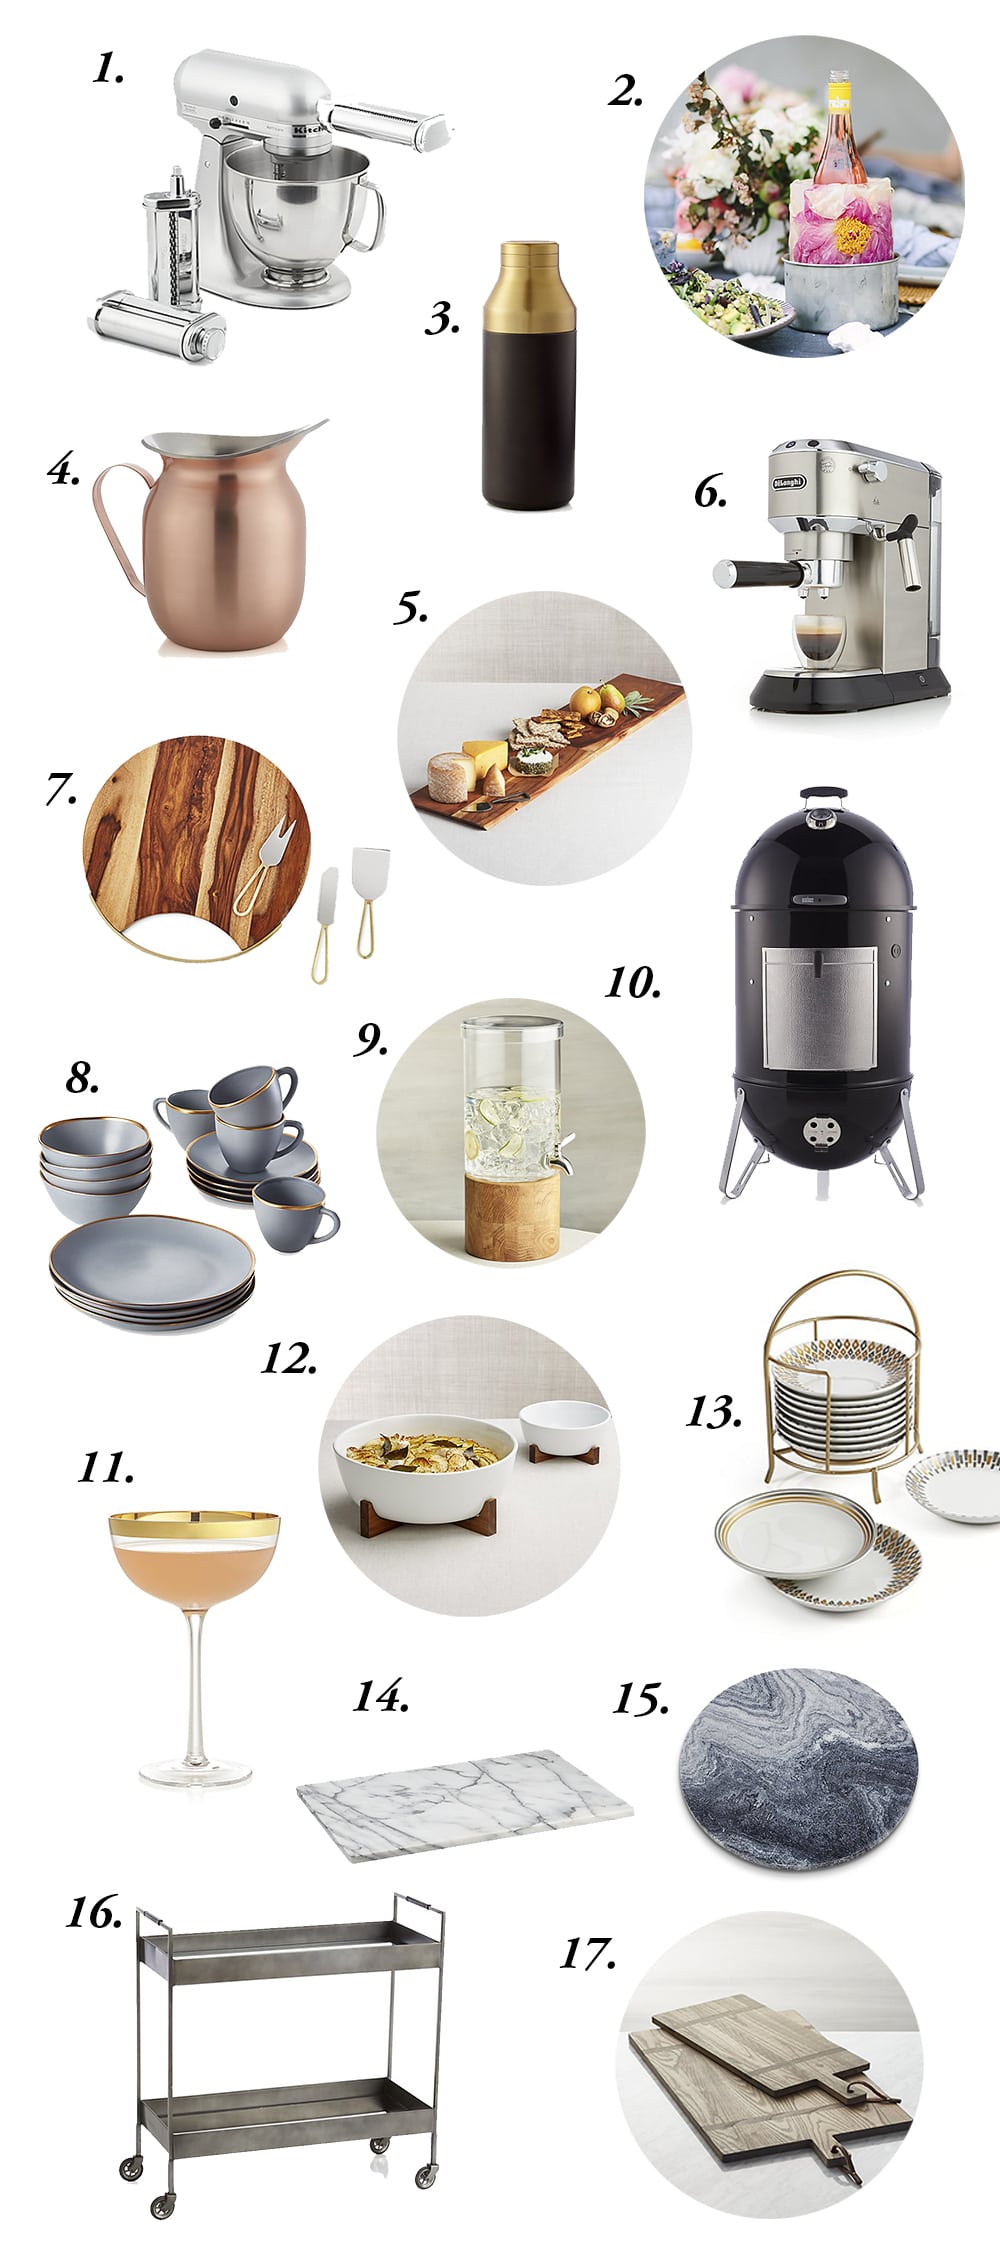 A collection of amazing crate & barrel goods